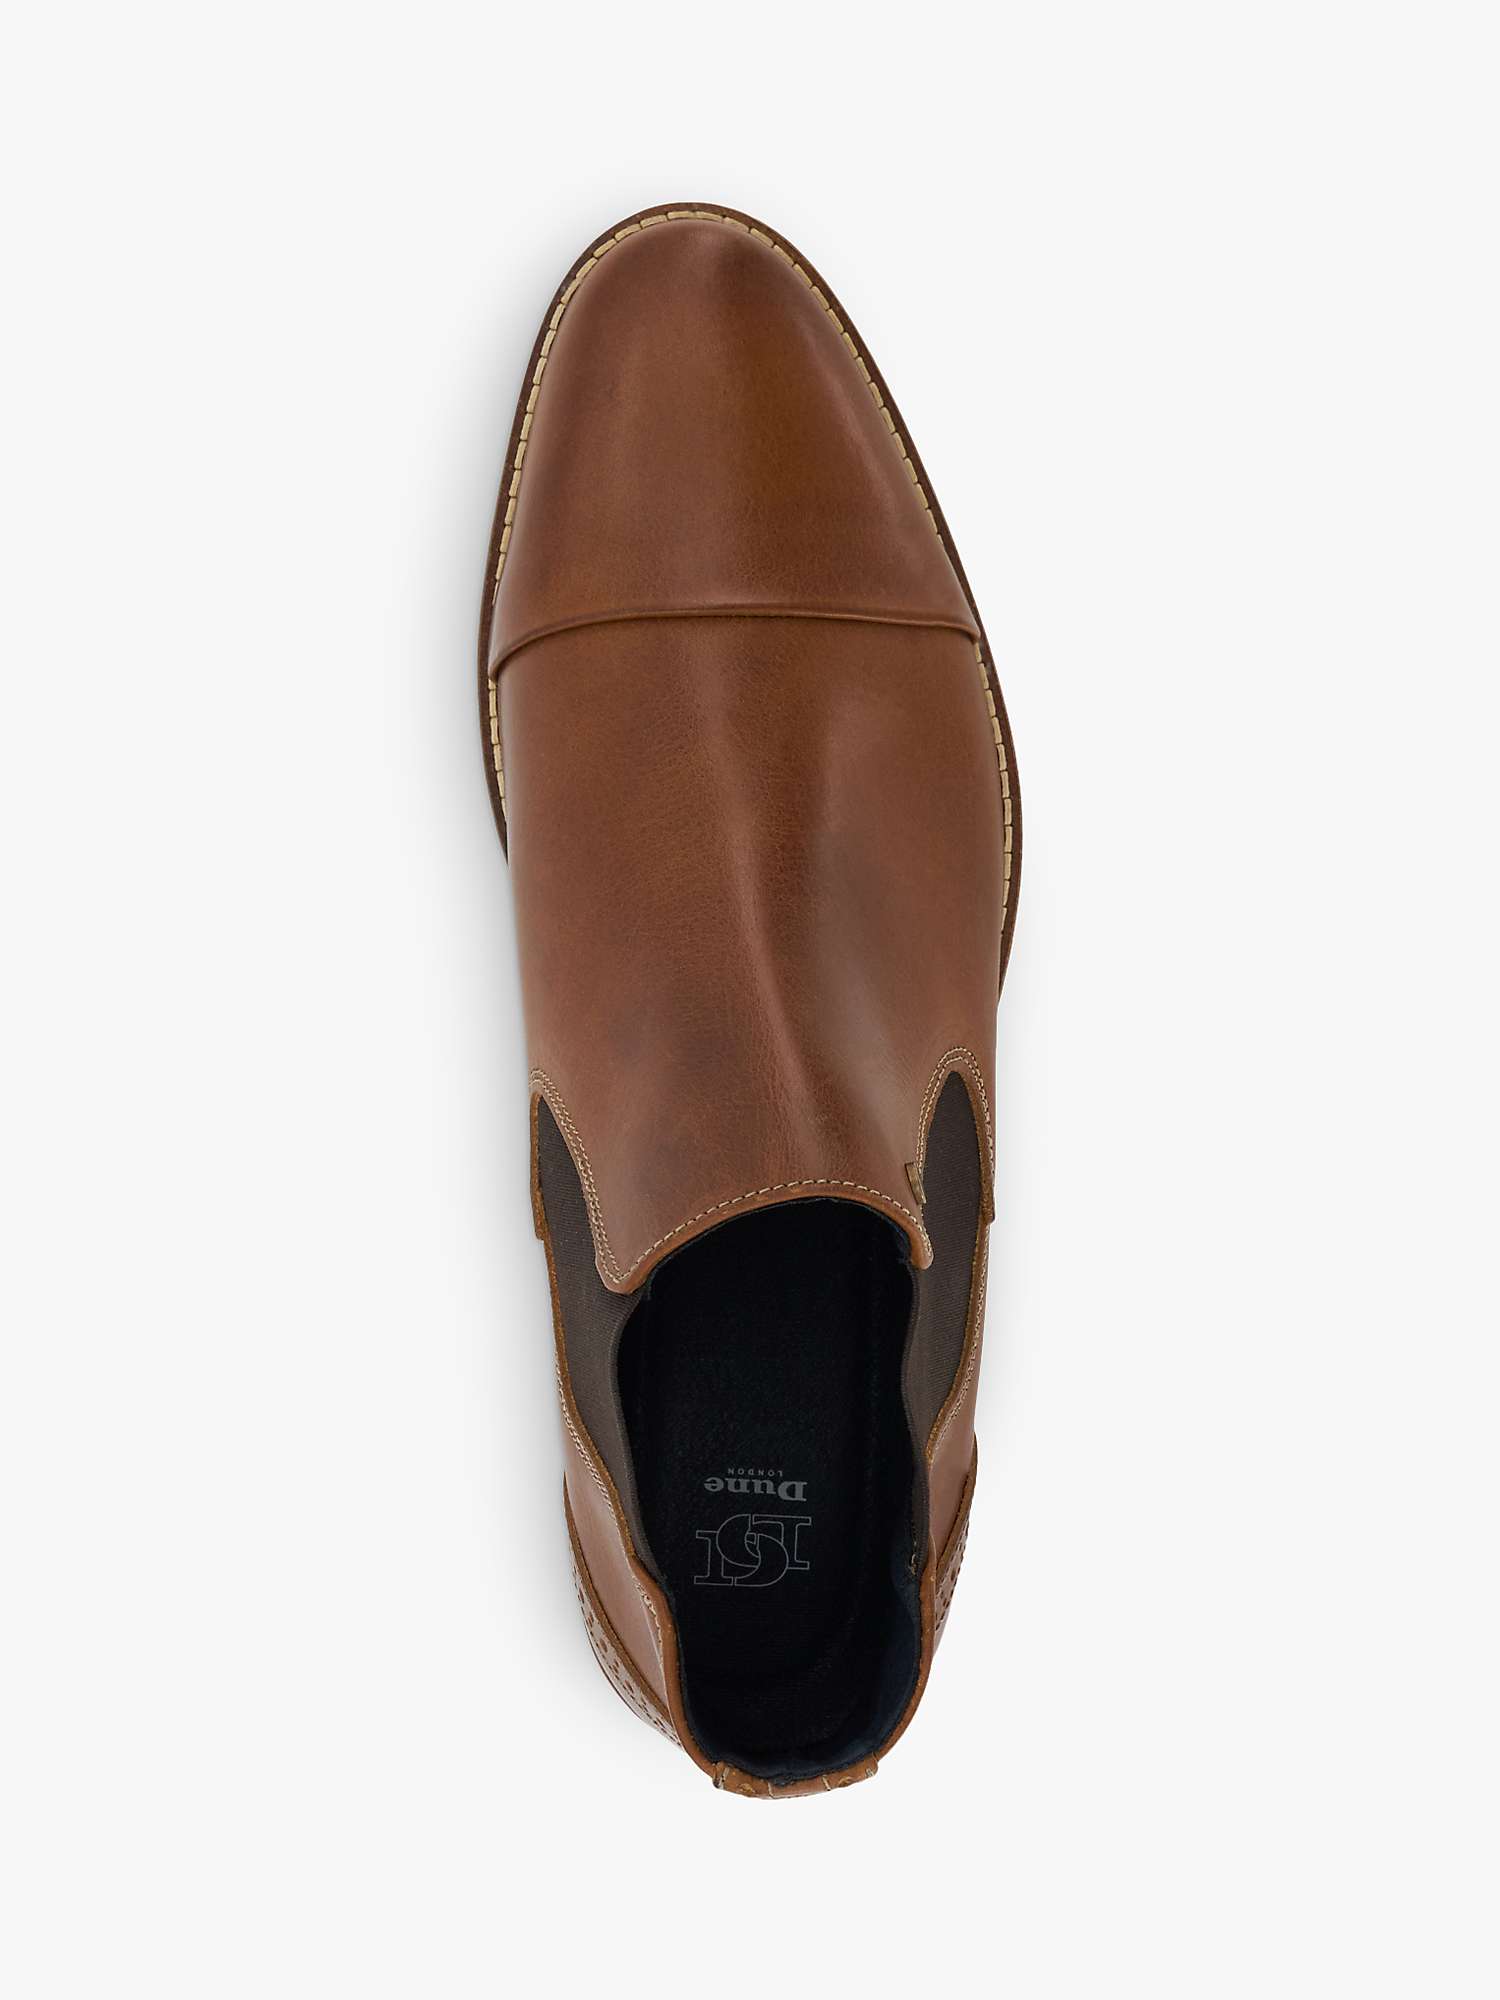 Buy Dune Chilean Wide Fit Leather Chelsea Boots, Tan Online at johnlewis.com